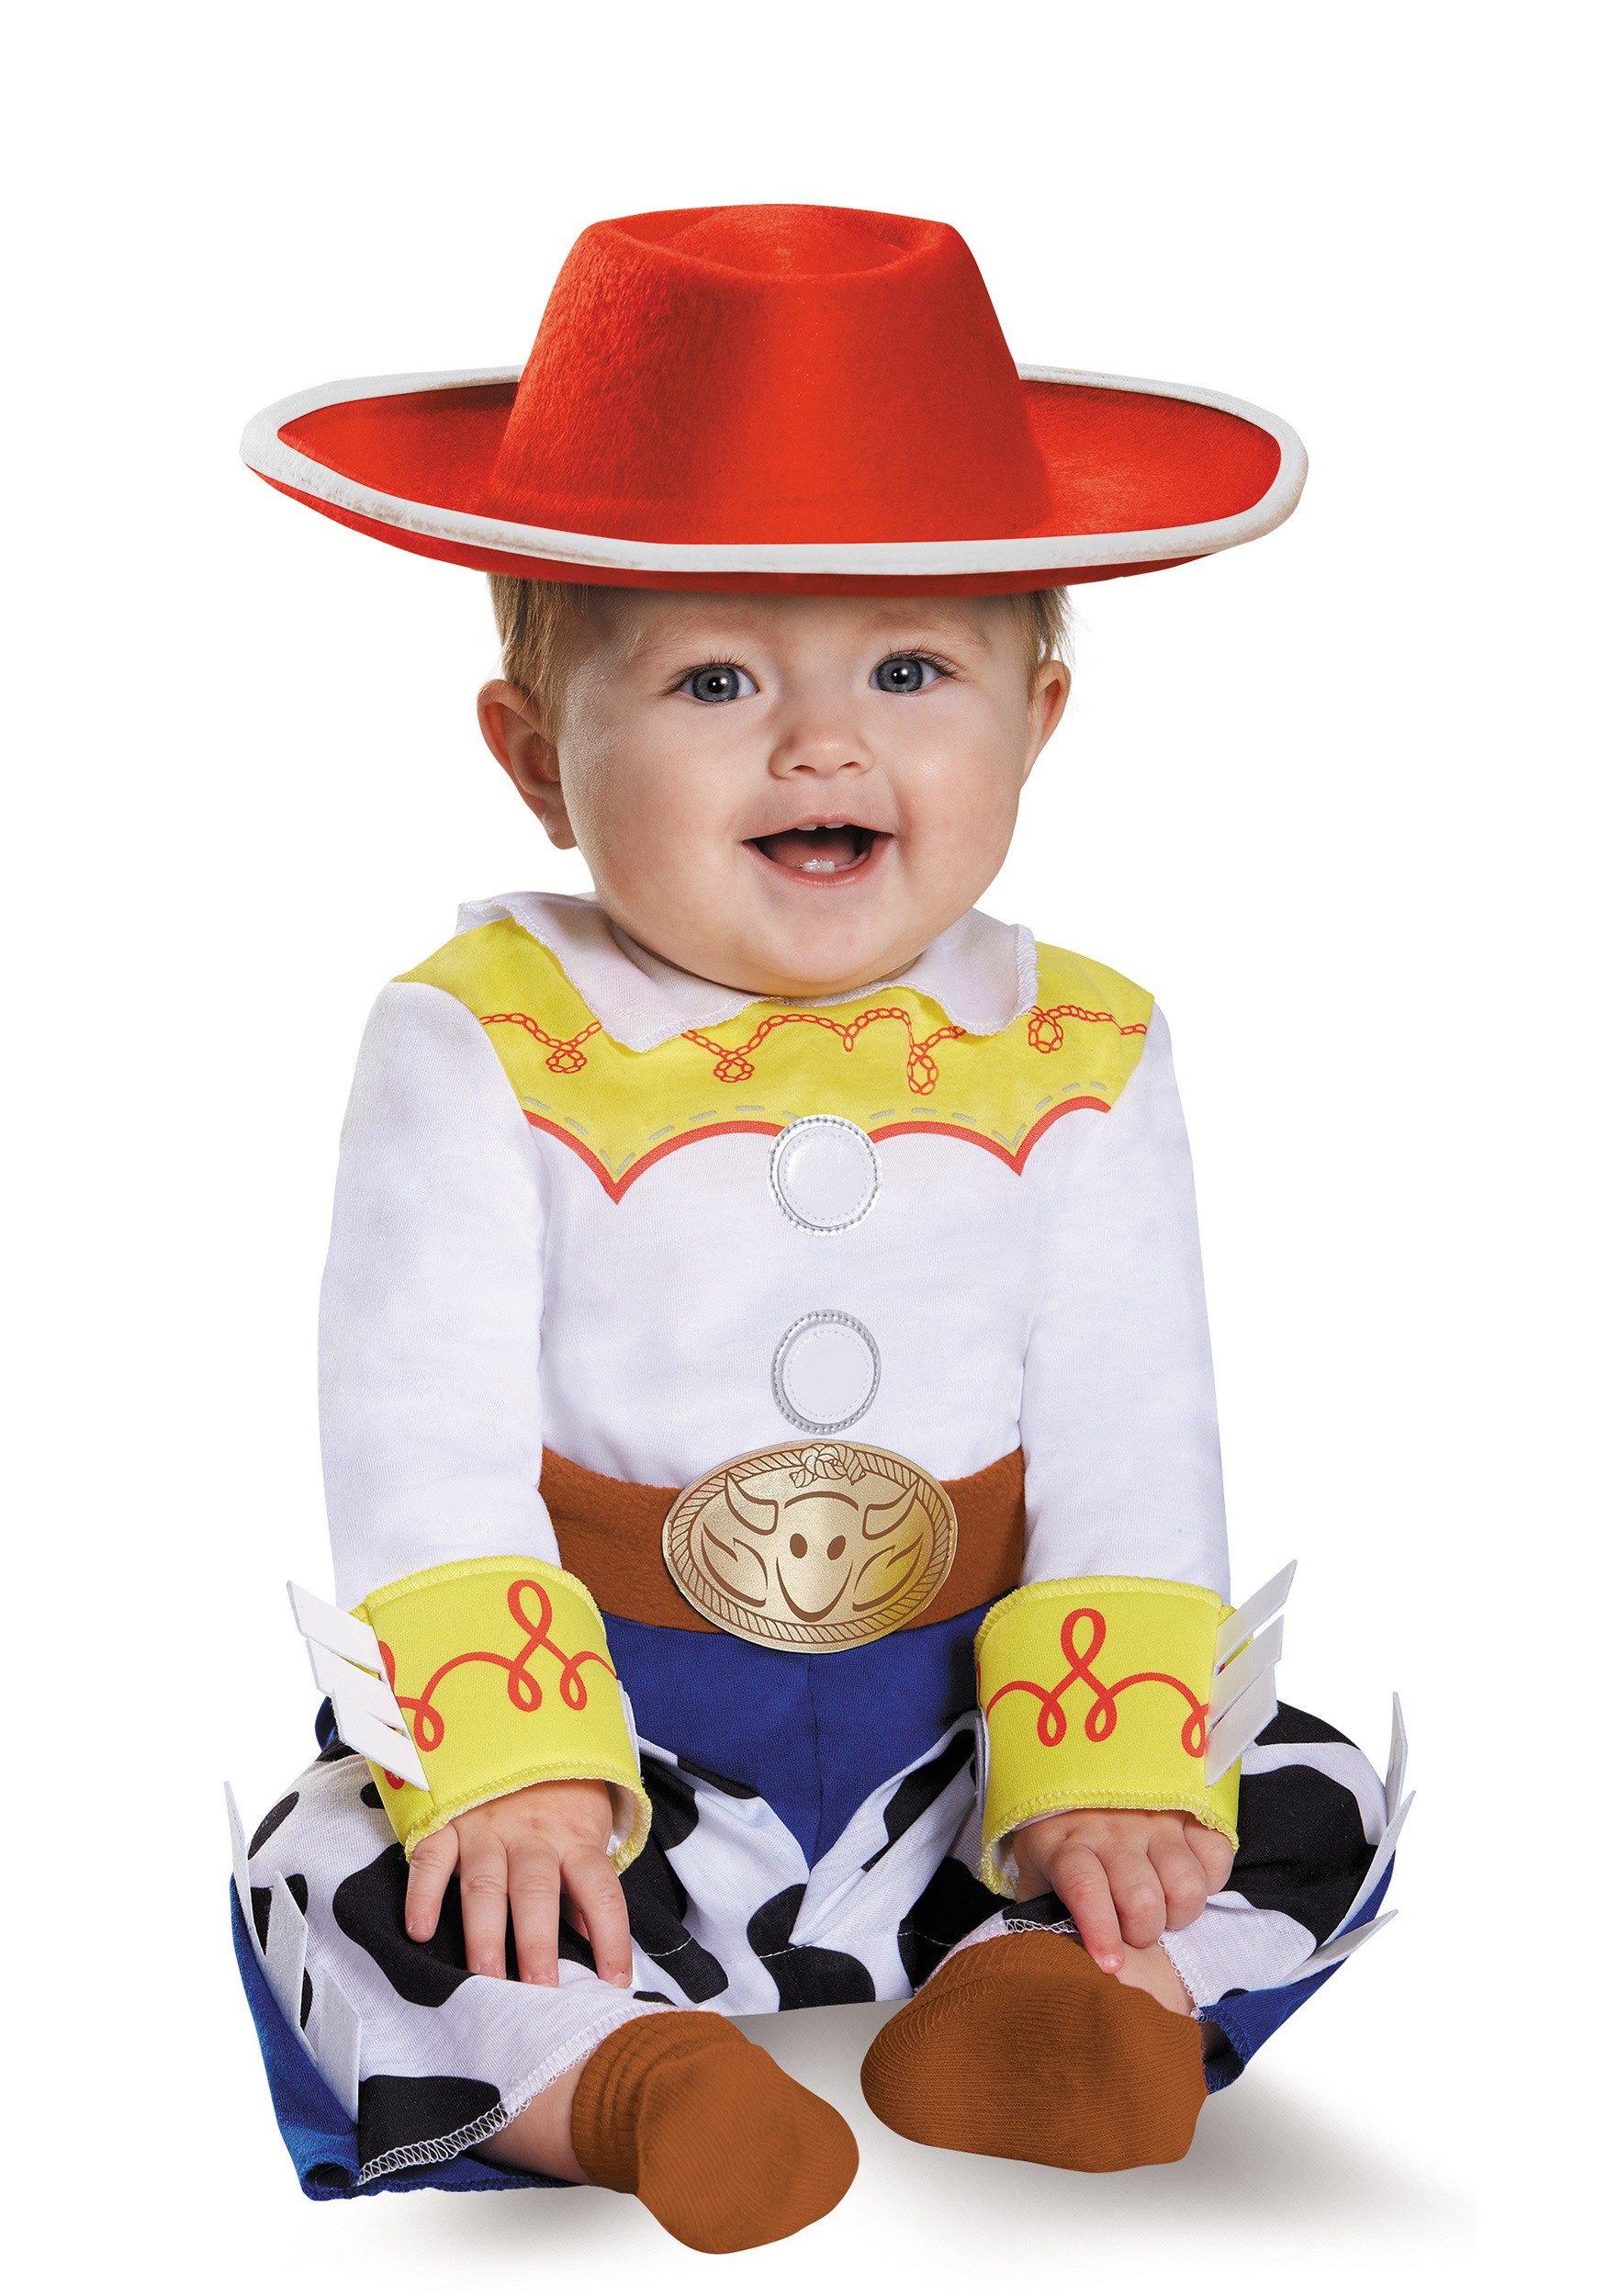 Photos - Fancy Dress Deluxe Disguise Infant  Jessie Costume White/Yellow DI85607 